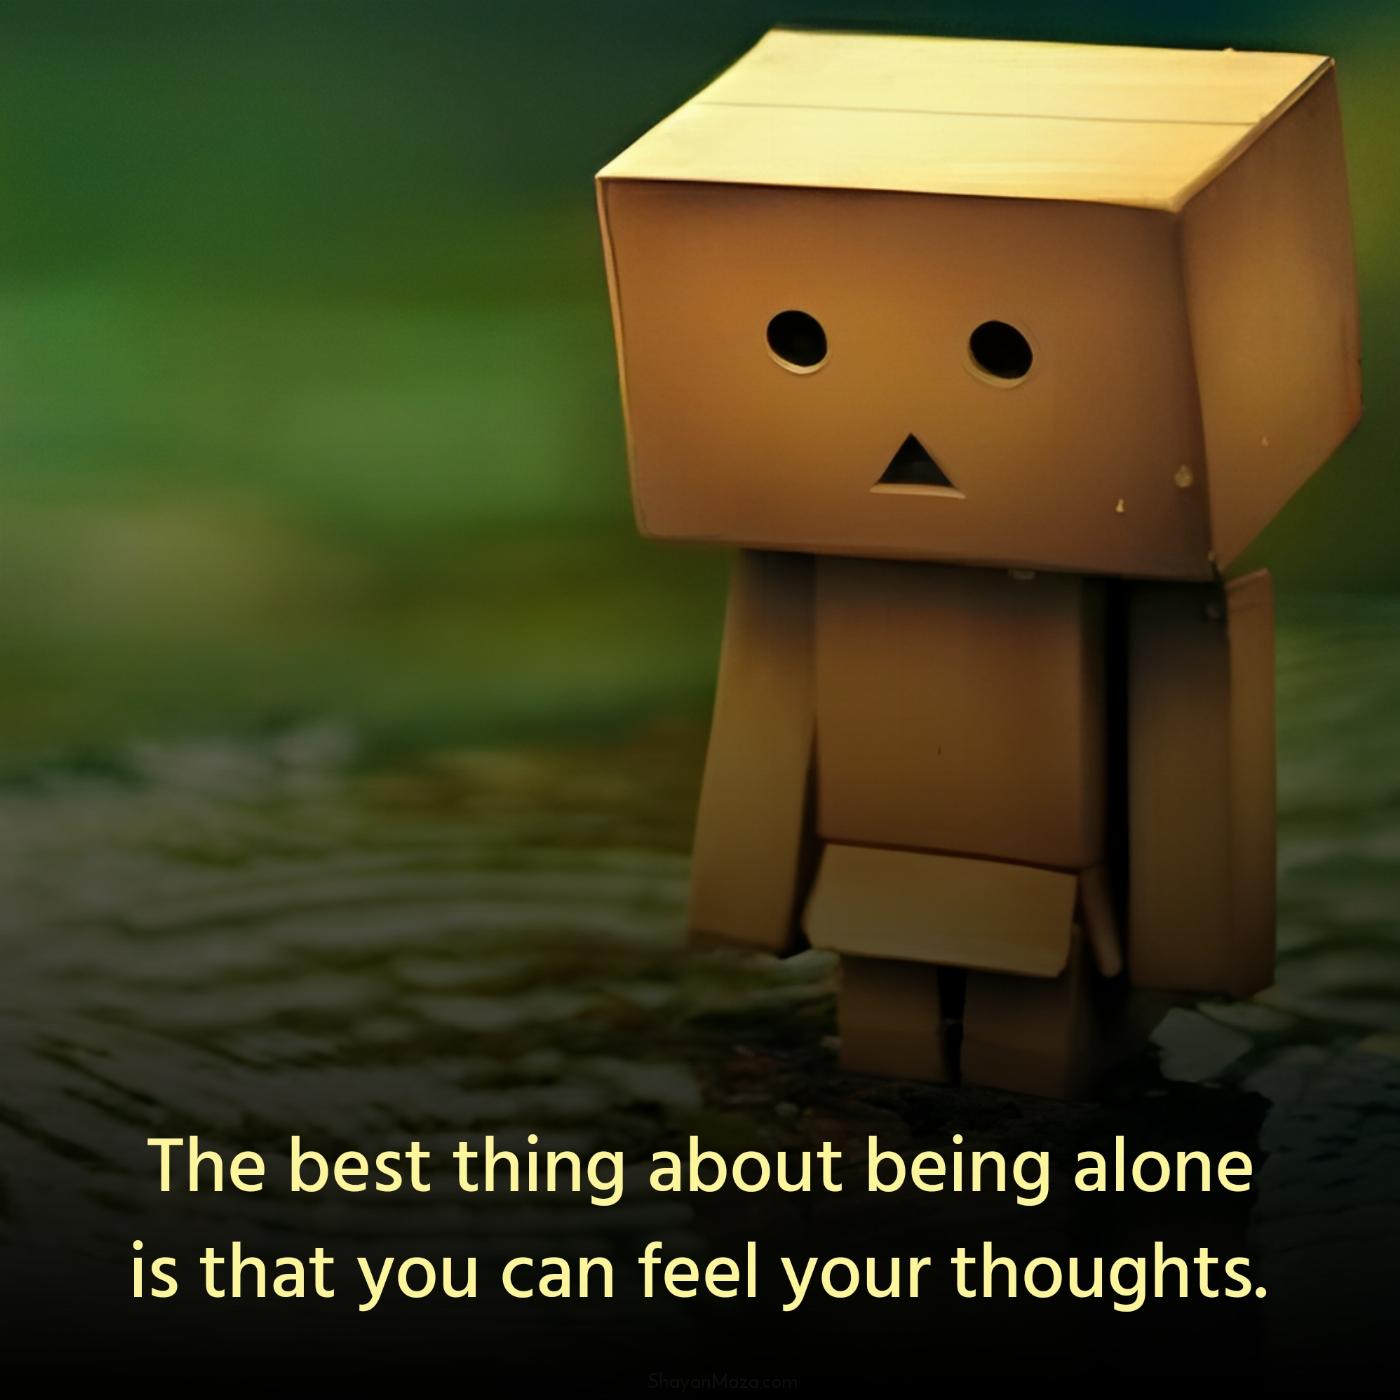 The best thing about being alone is that you can feel your thoughts